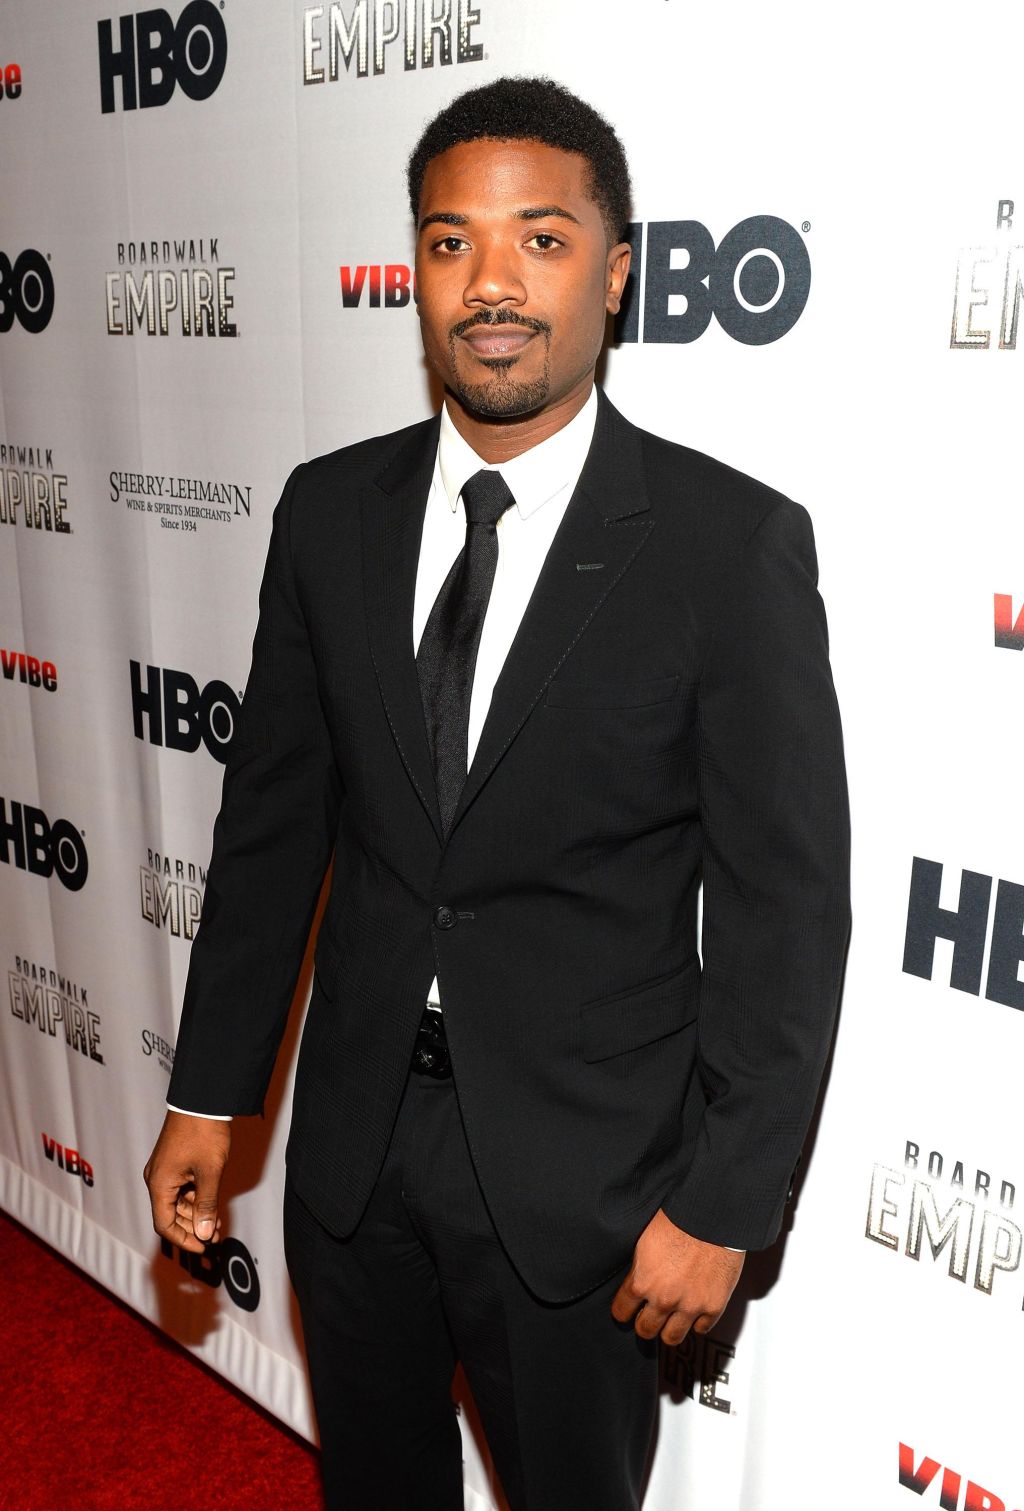 HBO 'Boardwalk Empire' Season Premiere Hosted By Sean 'Diddy' Combs